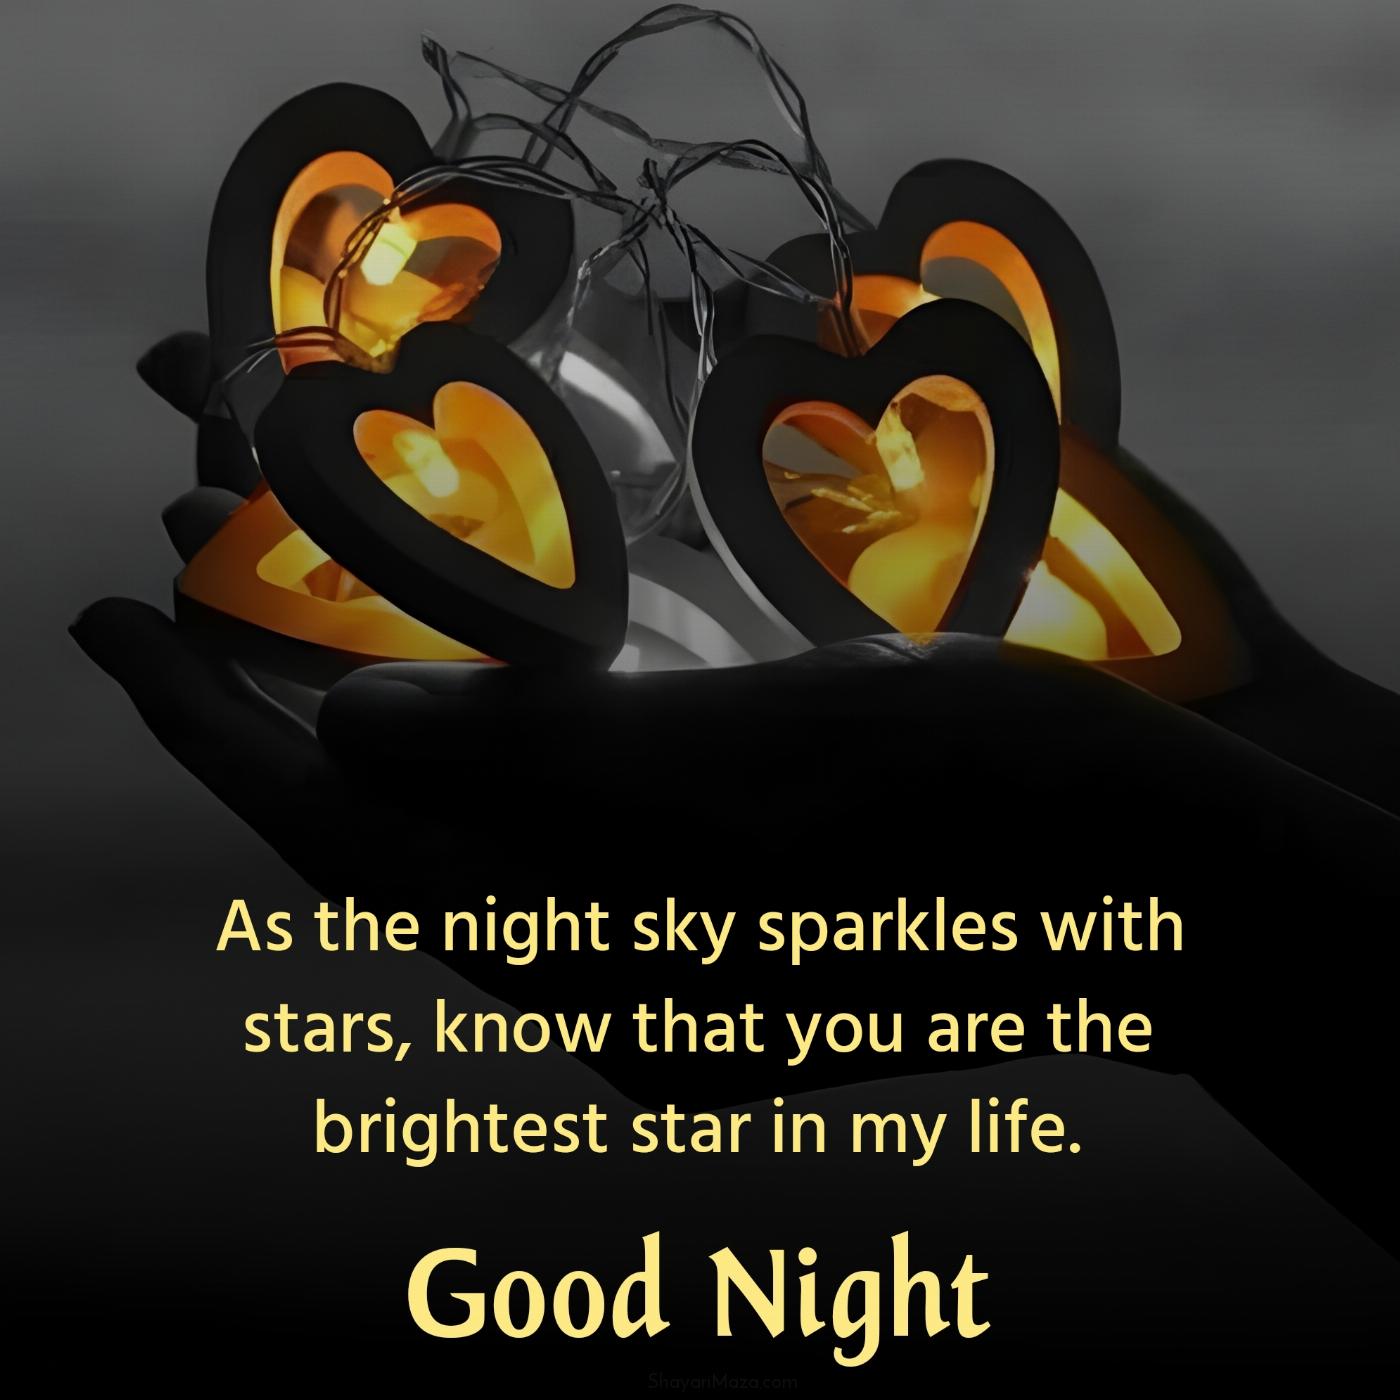 As the night sky sparkles with stars know that you are the brightest